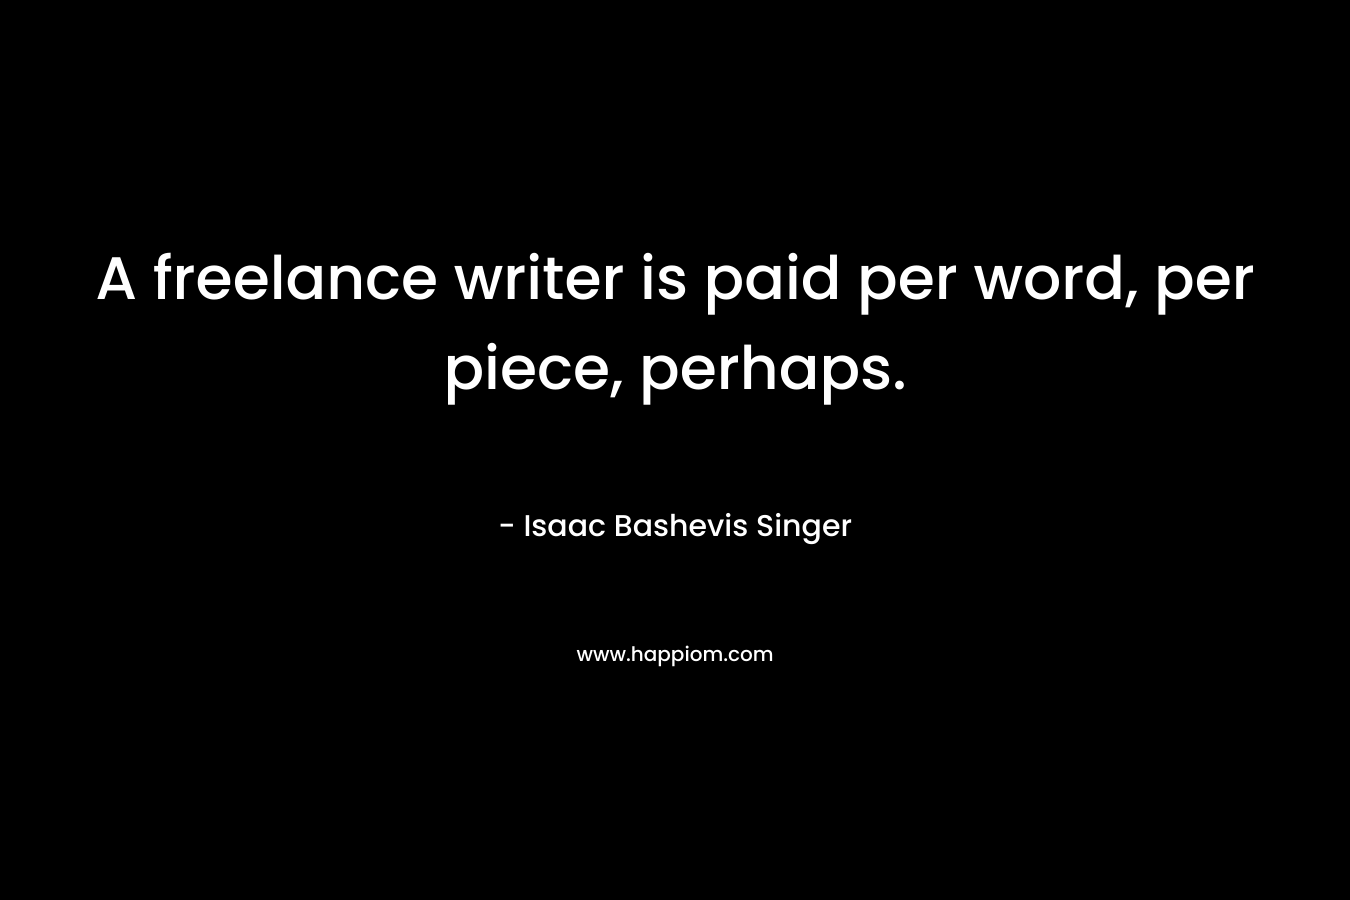 A freelance writer is paid per word, per piece, perhaps. – Isaac Bashevis Singer